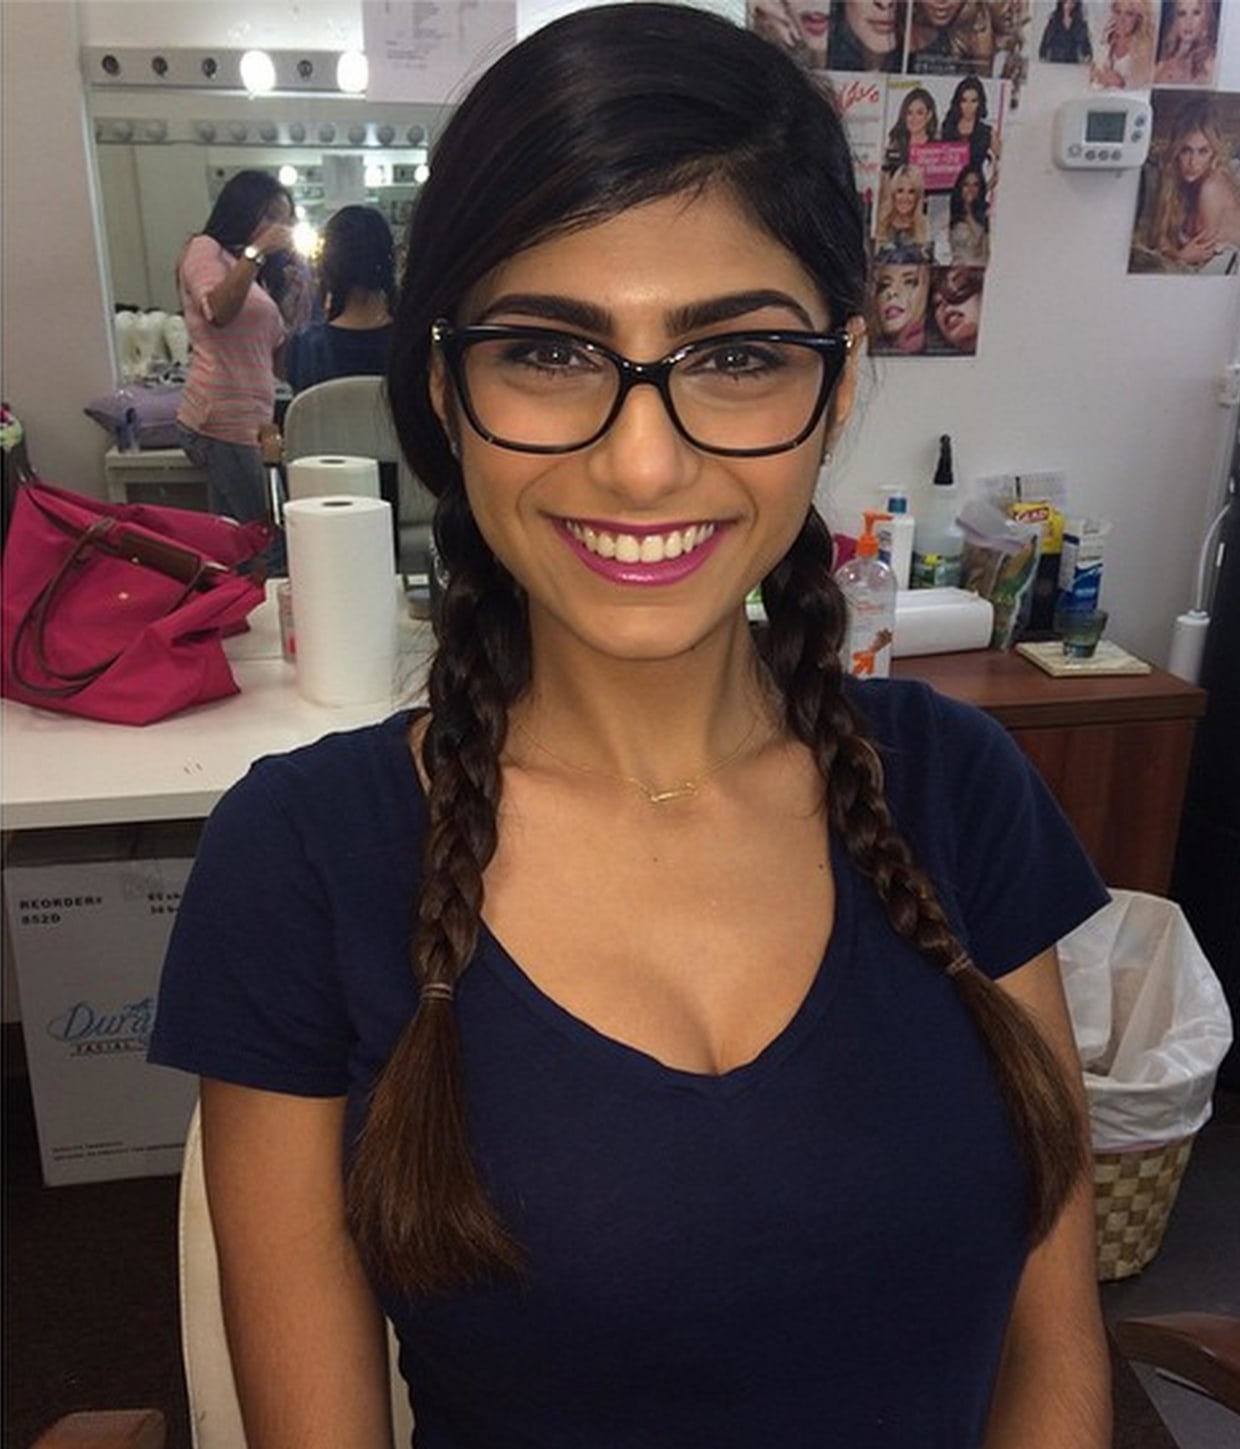 andy wernette recommends mia khalifa breaking news pic